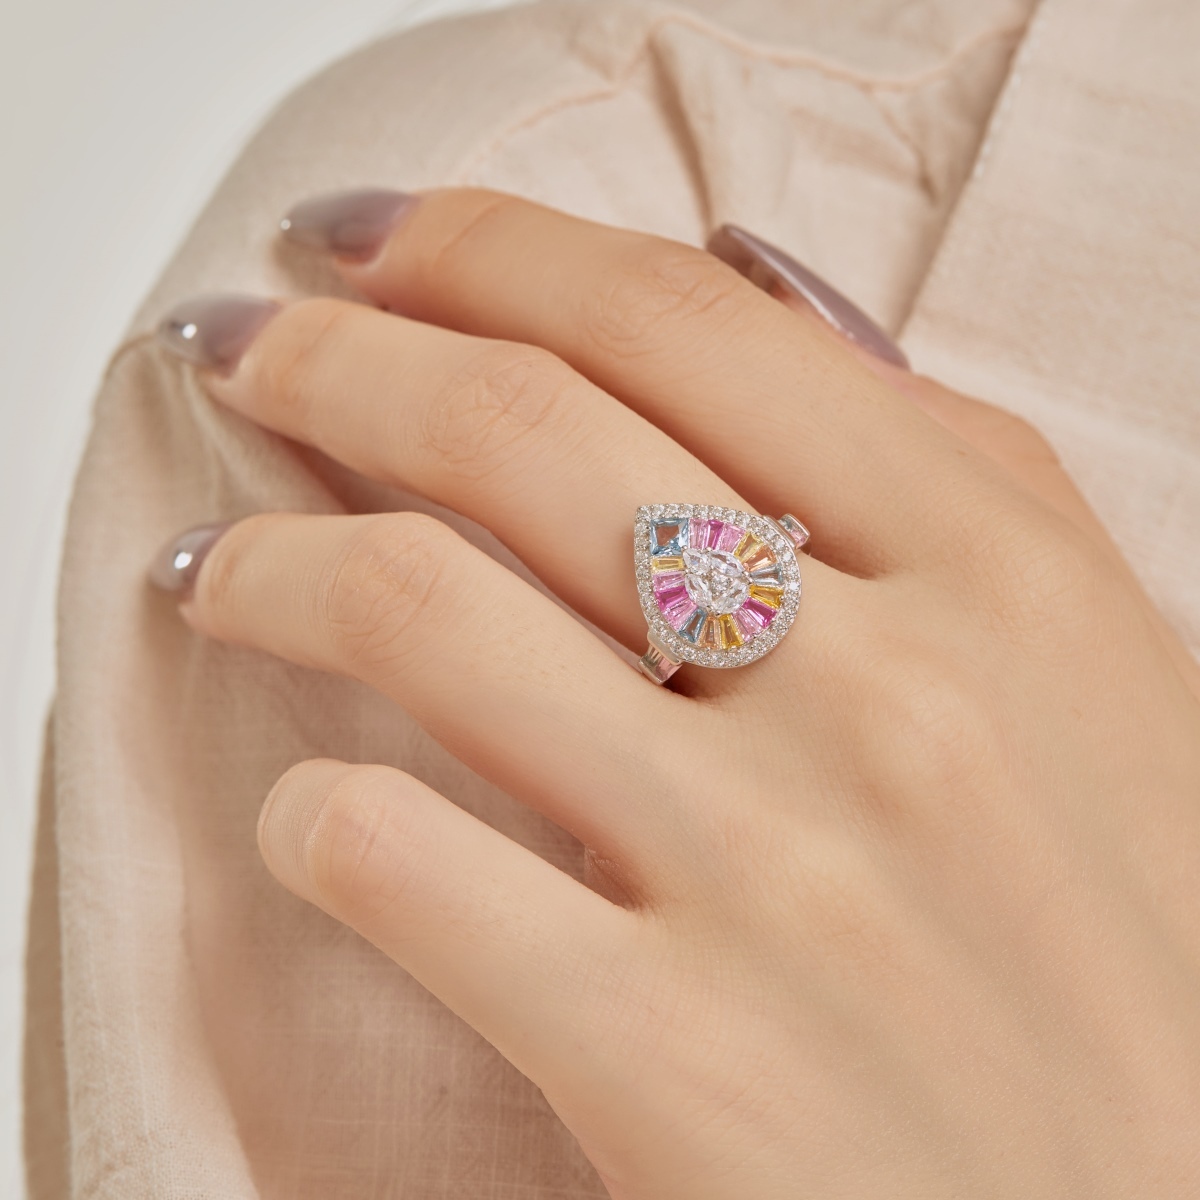 Rainbow Droplets Pave Statement Ring